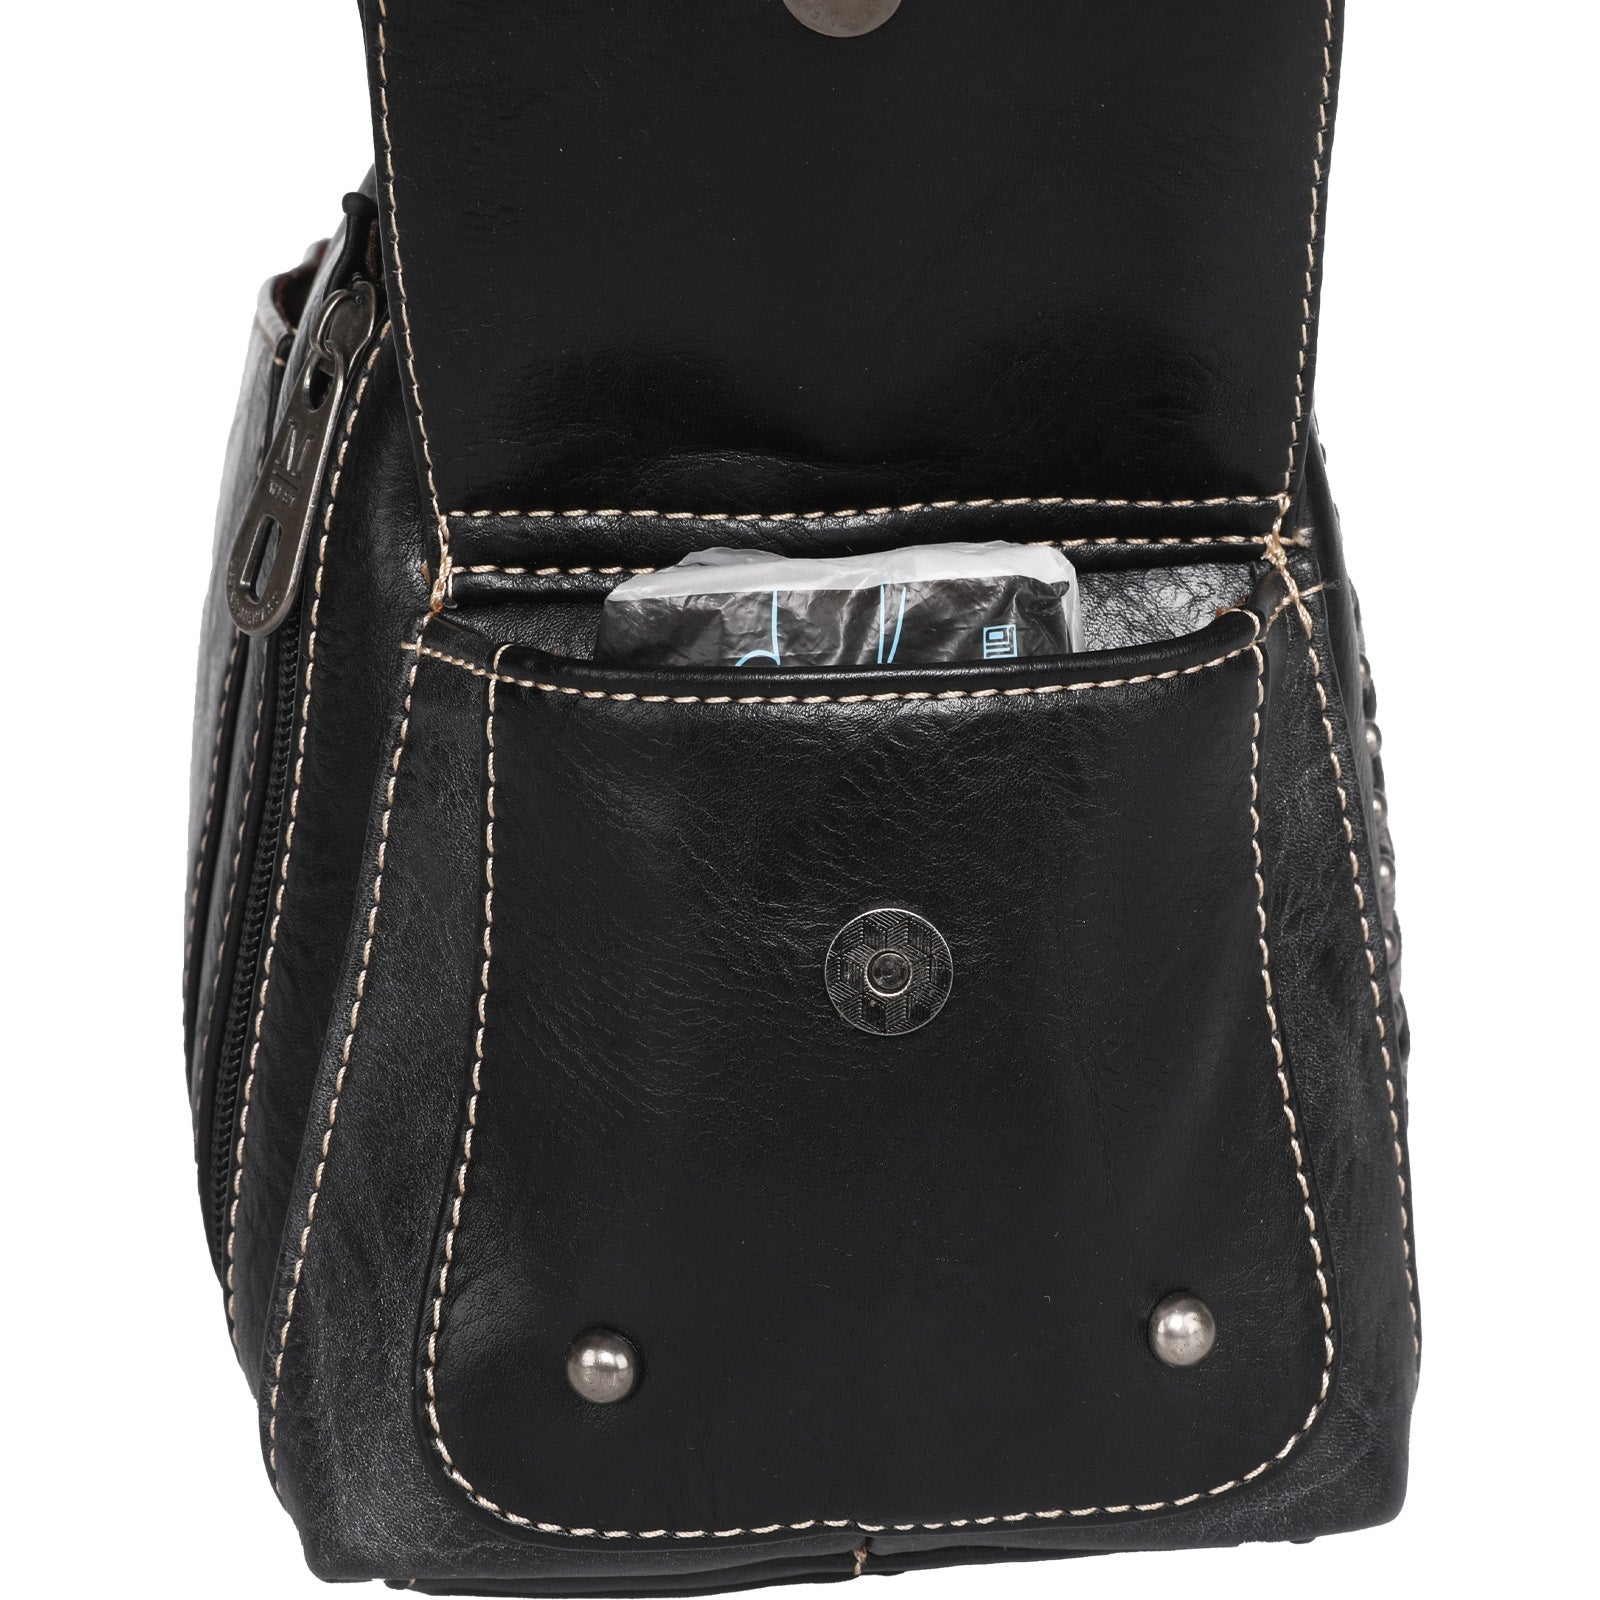 Montana West Whipstitch Collection Concealed Carry Satchel - Montana West World